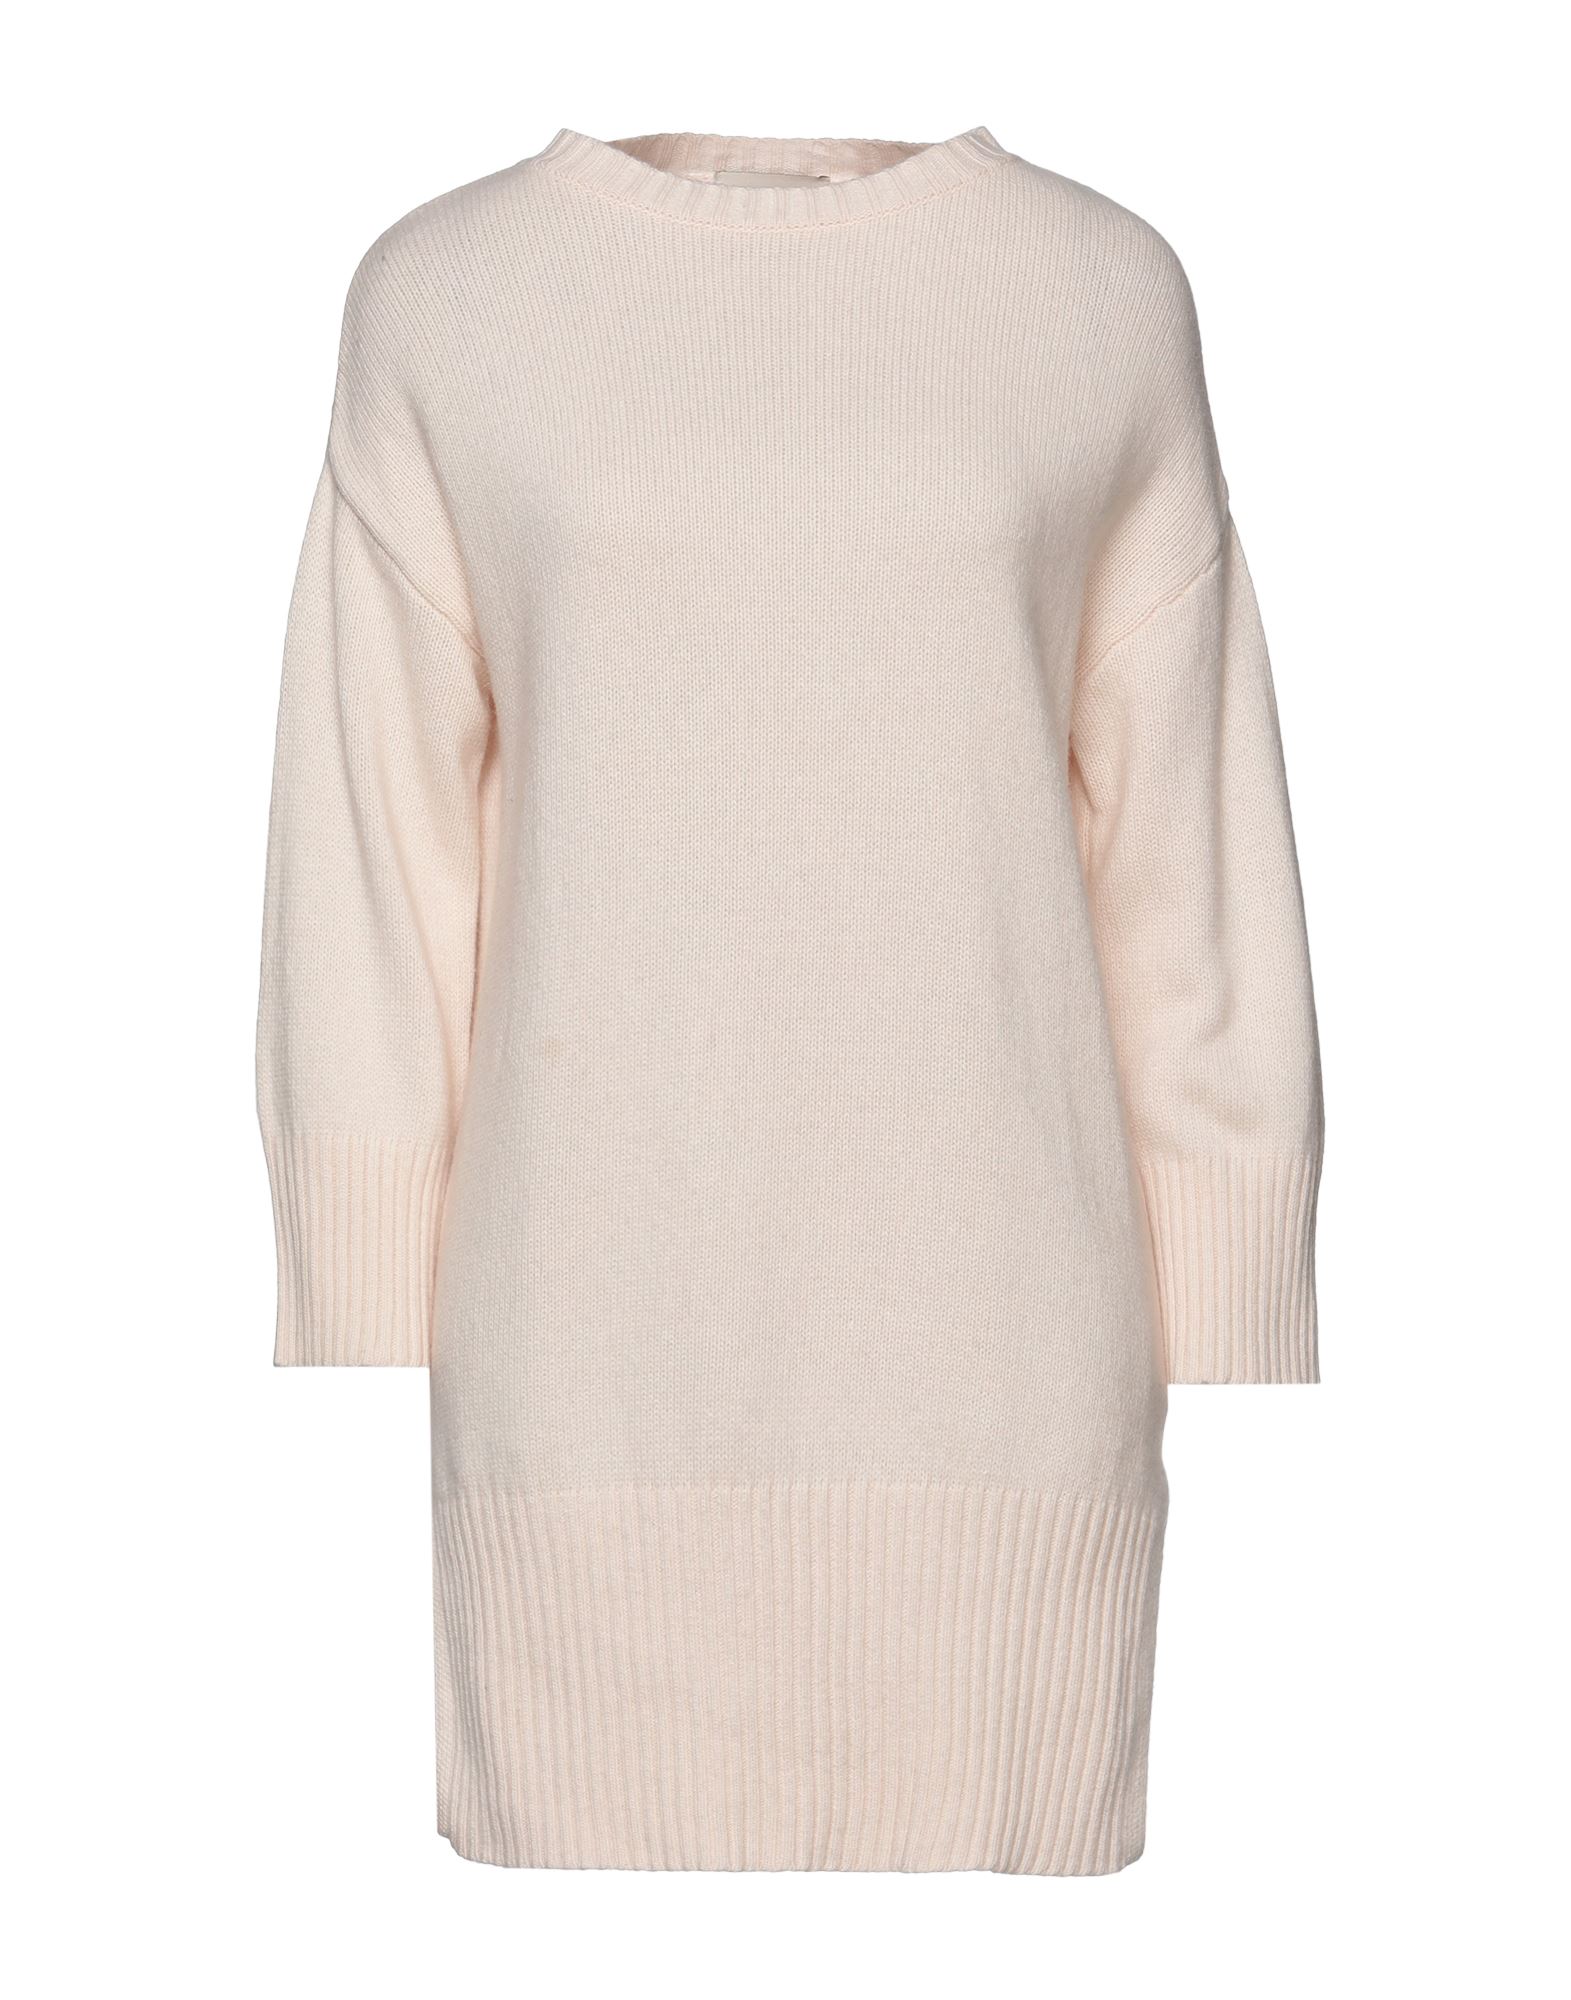 N.o.w. Andrea Rosati Cashmere Sweaters In Light Pink